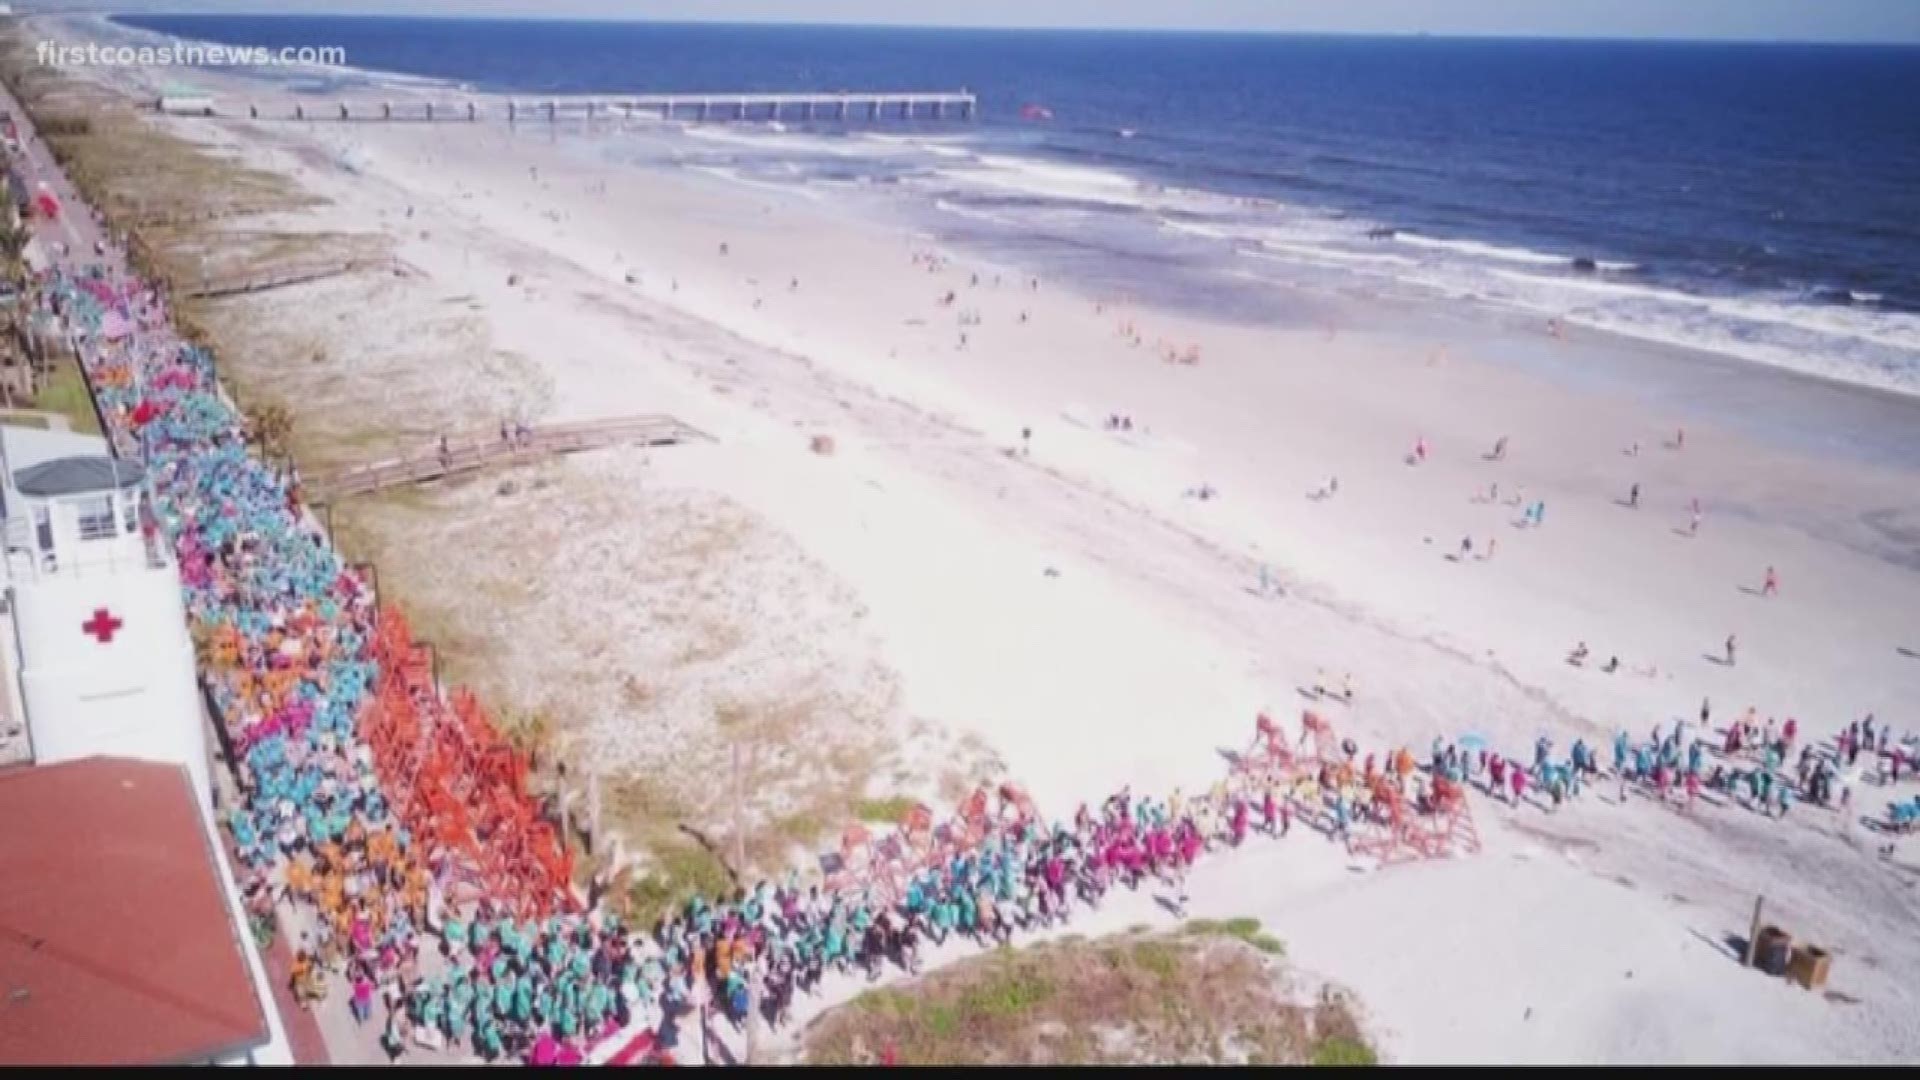 The Down Syndrome Association of Jacksonville (DSAJ) will host its 17th annual Buddy Walk on Sunday, Oct. 20, at the Seawalk Pavilion in Jacksonville Beach.